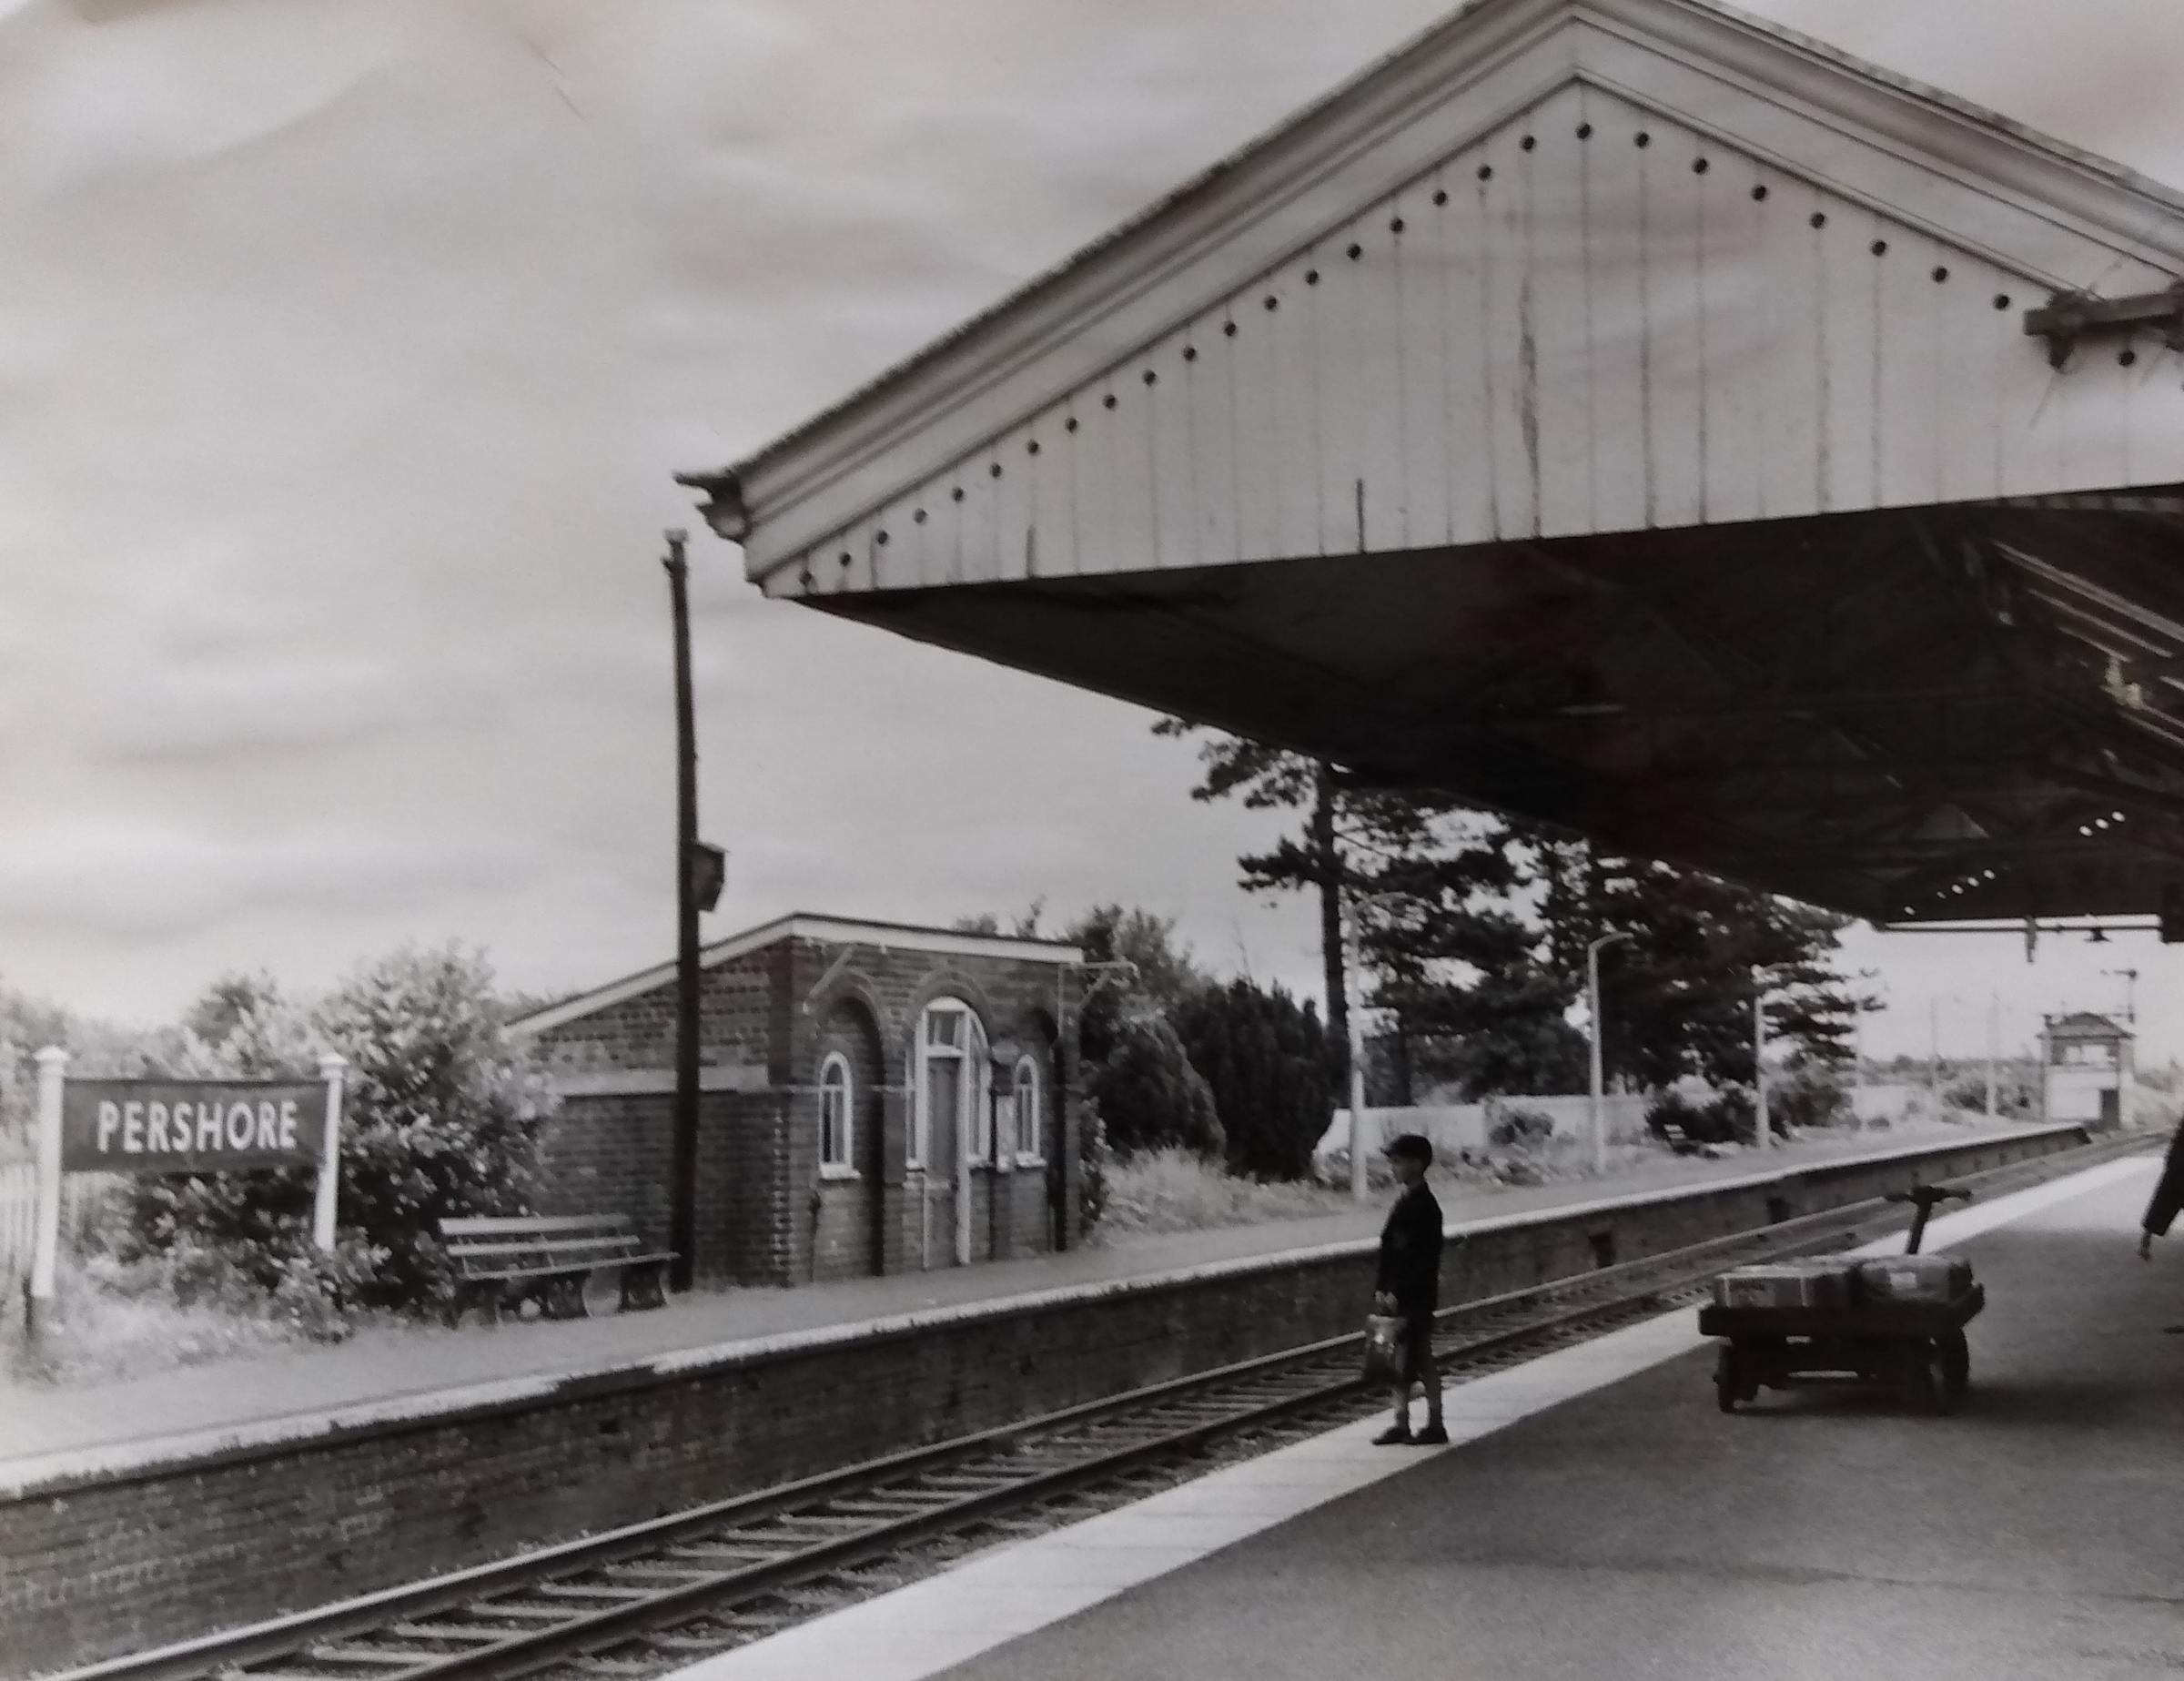 Waiting for the train that never comes... Pershore railway station in June 1966